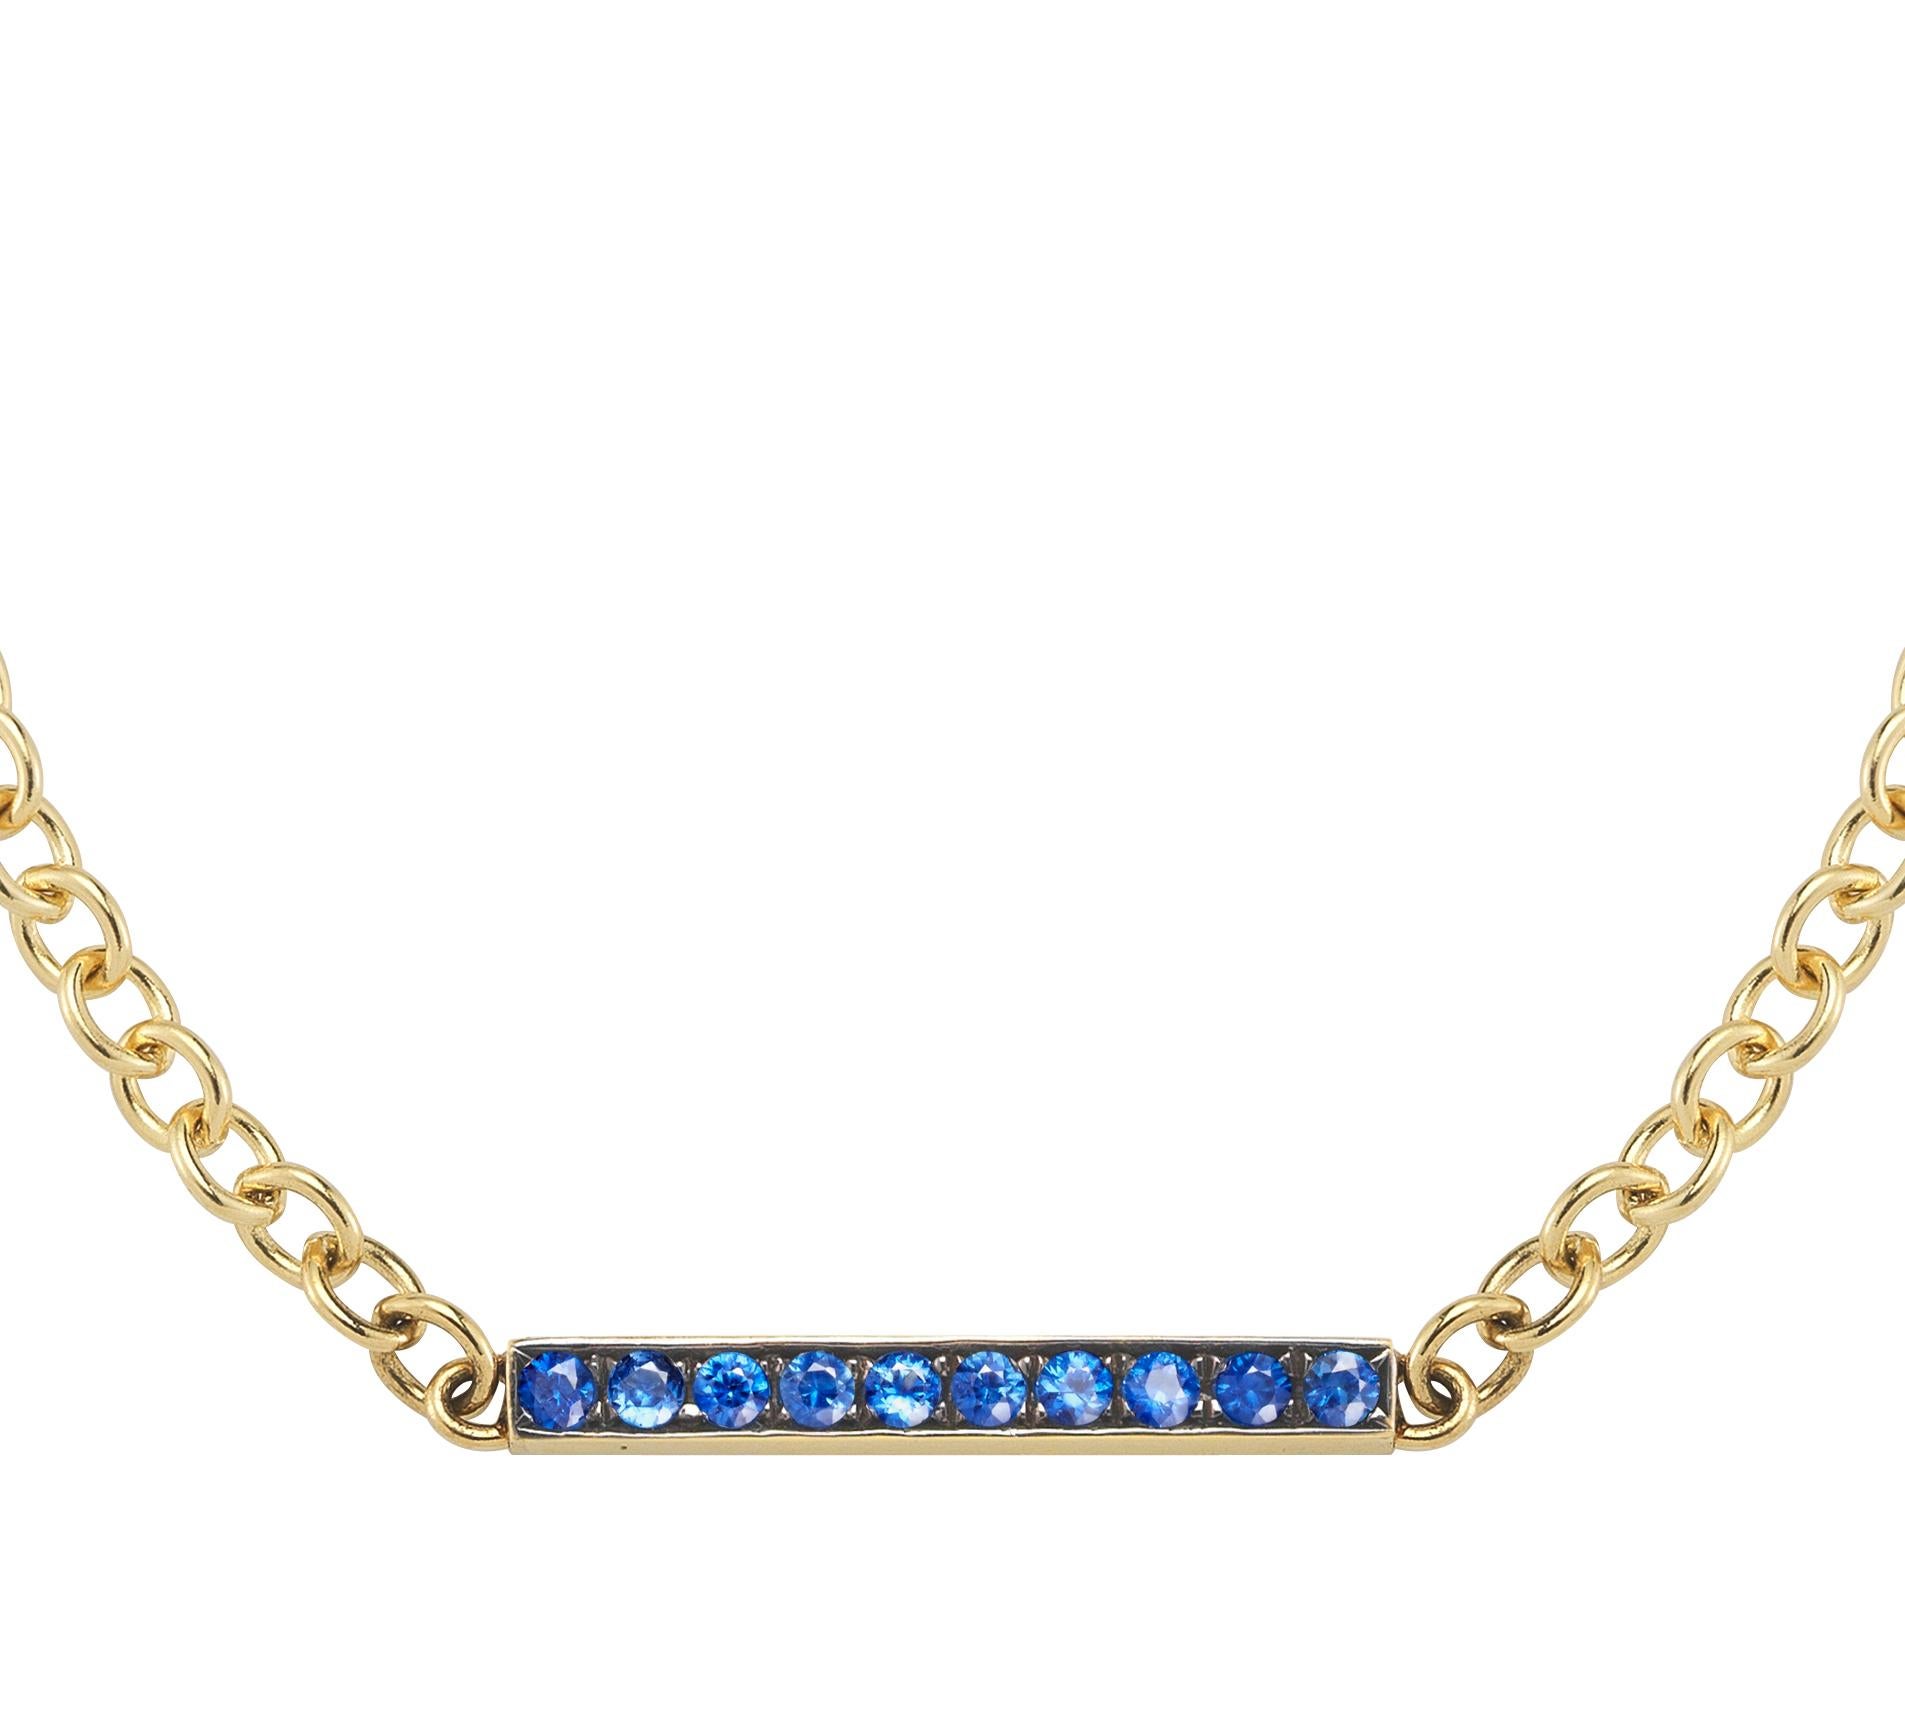 Gold bracelet hand set with sapphire. The setting is painted with black rhodium which makes the sapphires really glow.

18k yellow gold 
0.30 cts of sapphire 
6